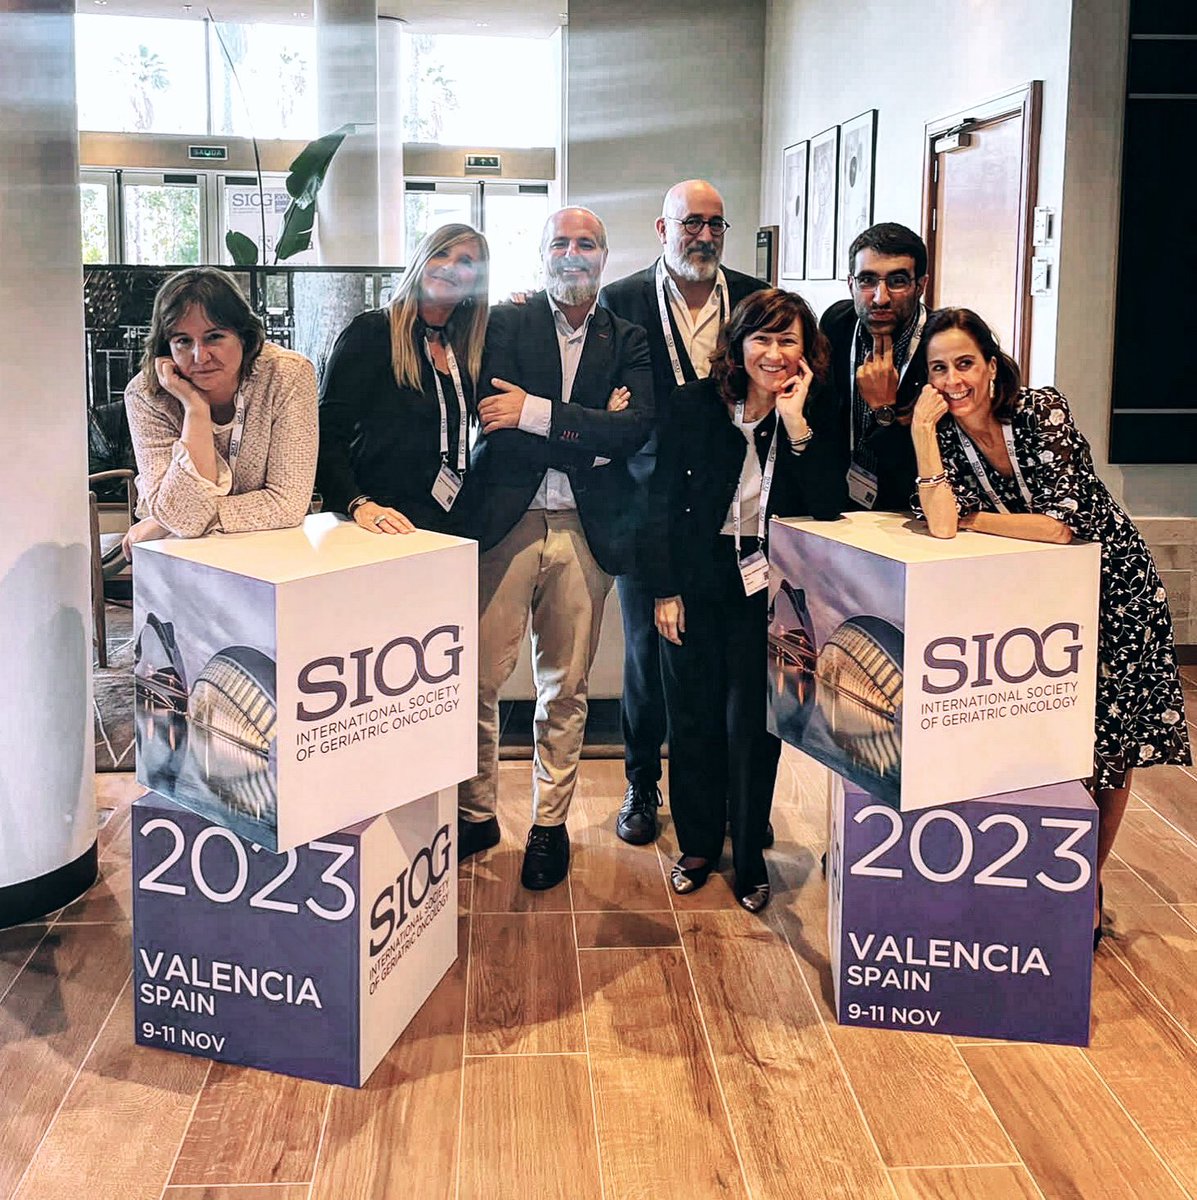 The example of #multidisciplinarity of #gerionc / #geriheme in Spain 🇪🇸: #oncology, #hematology and #geriatric specialists gathering in Valencia for #SIOG2023